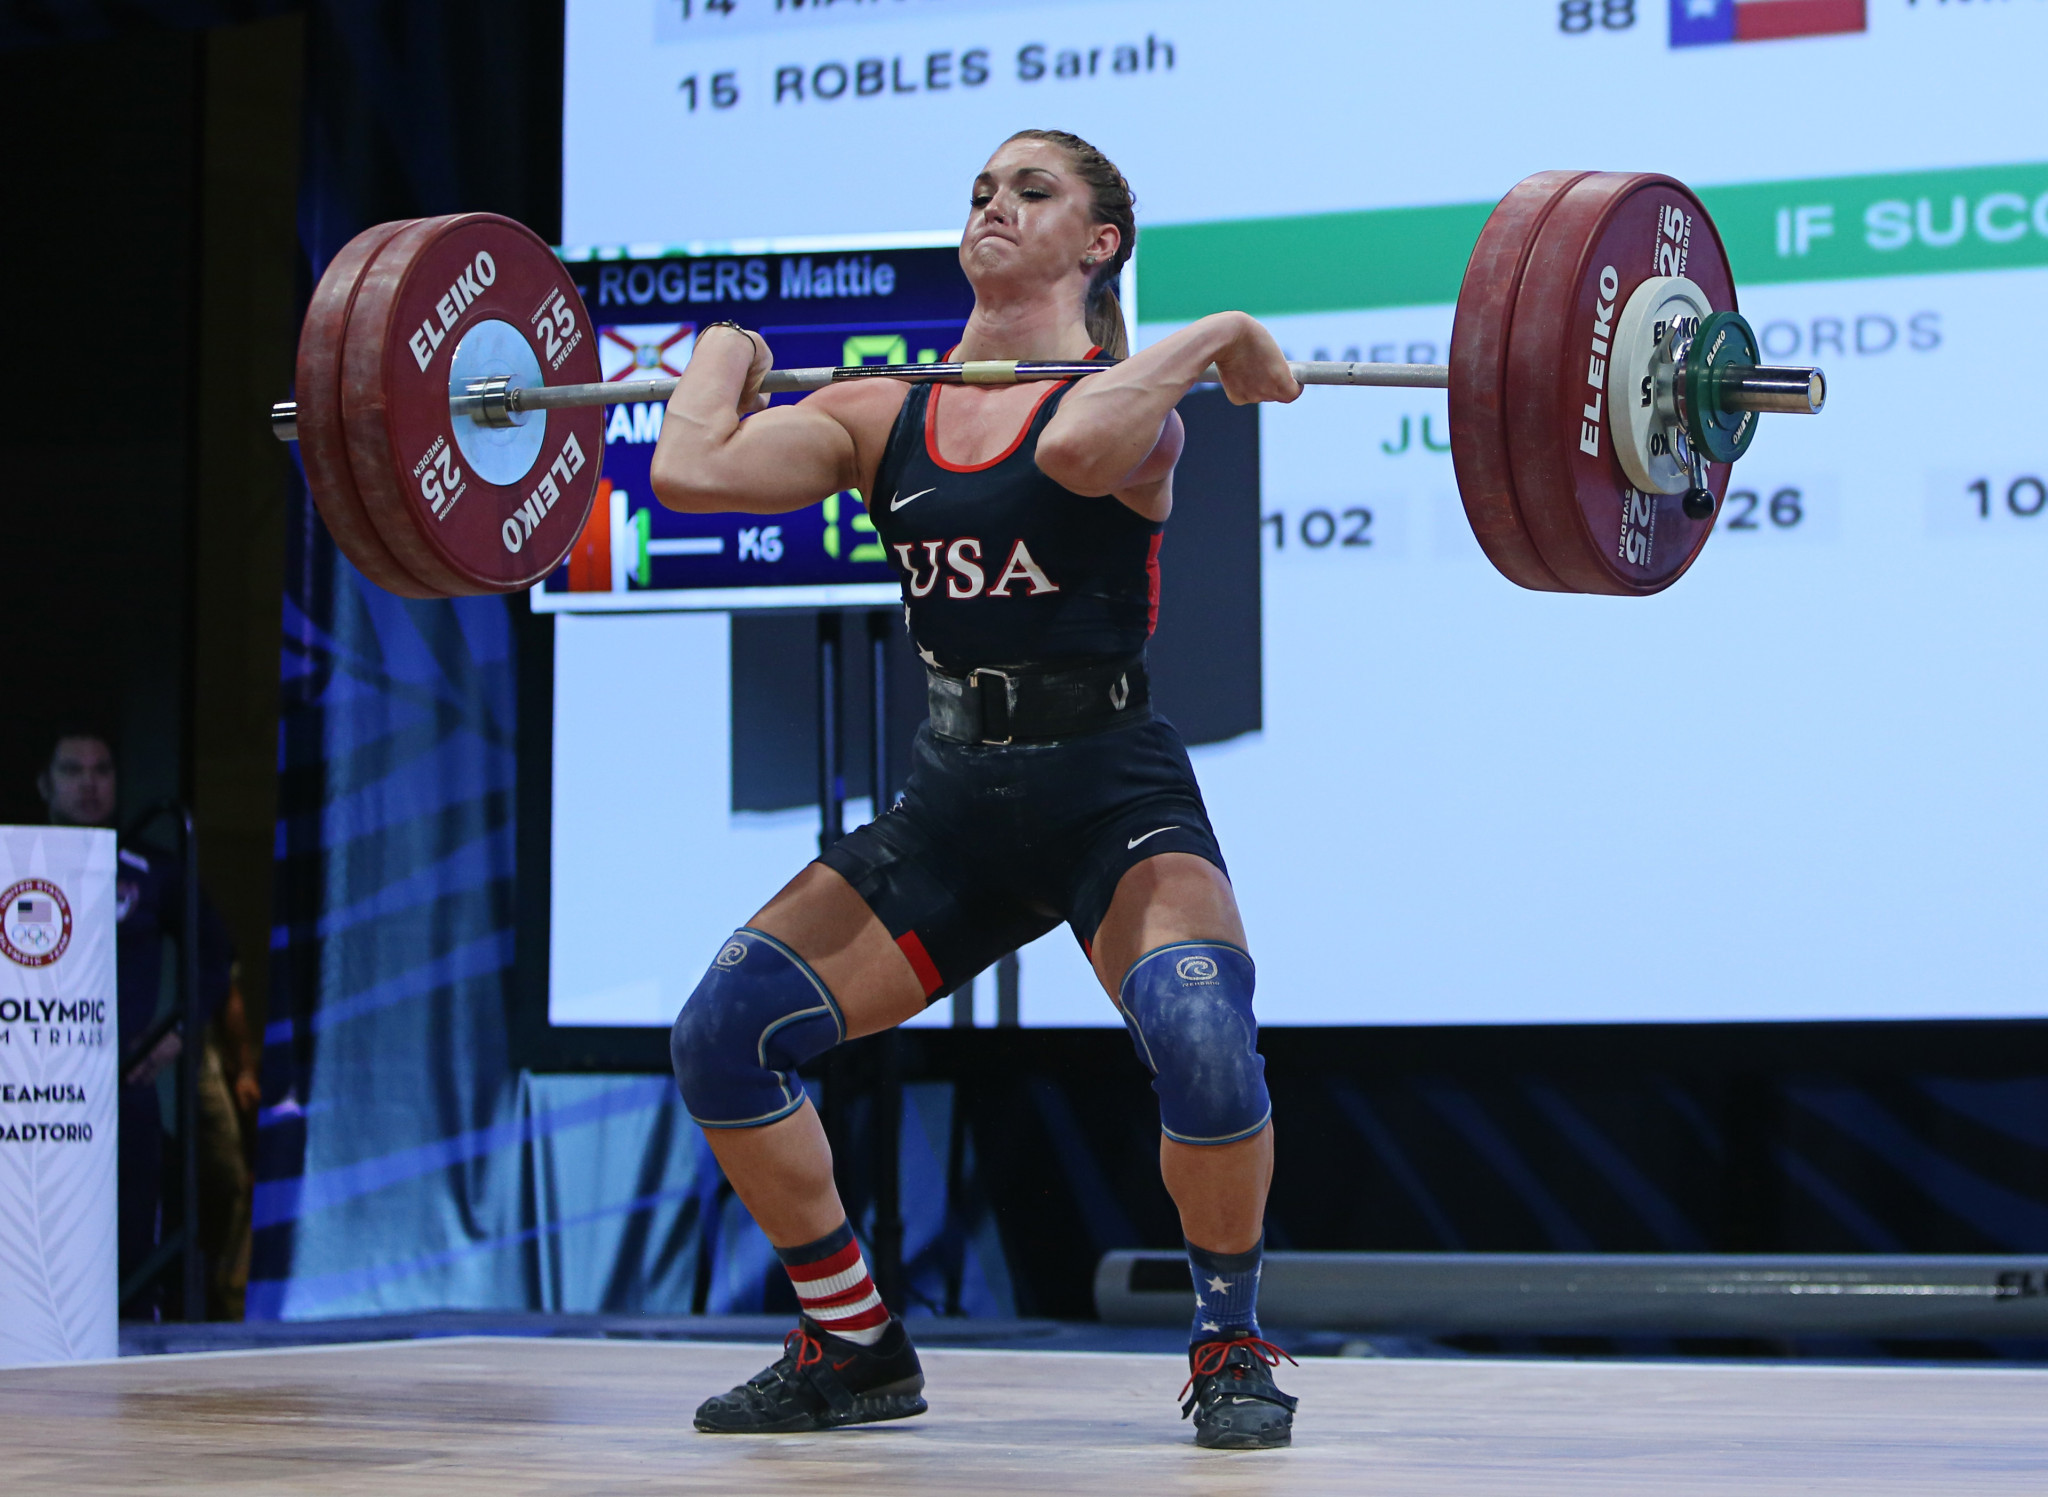 The overall standings are determined upon completion of the Clean and Jerk ©Getty Images